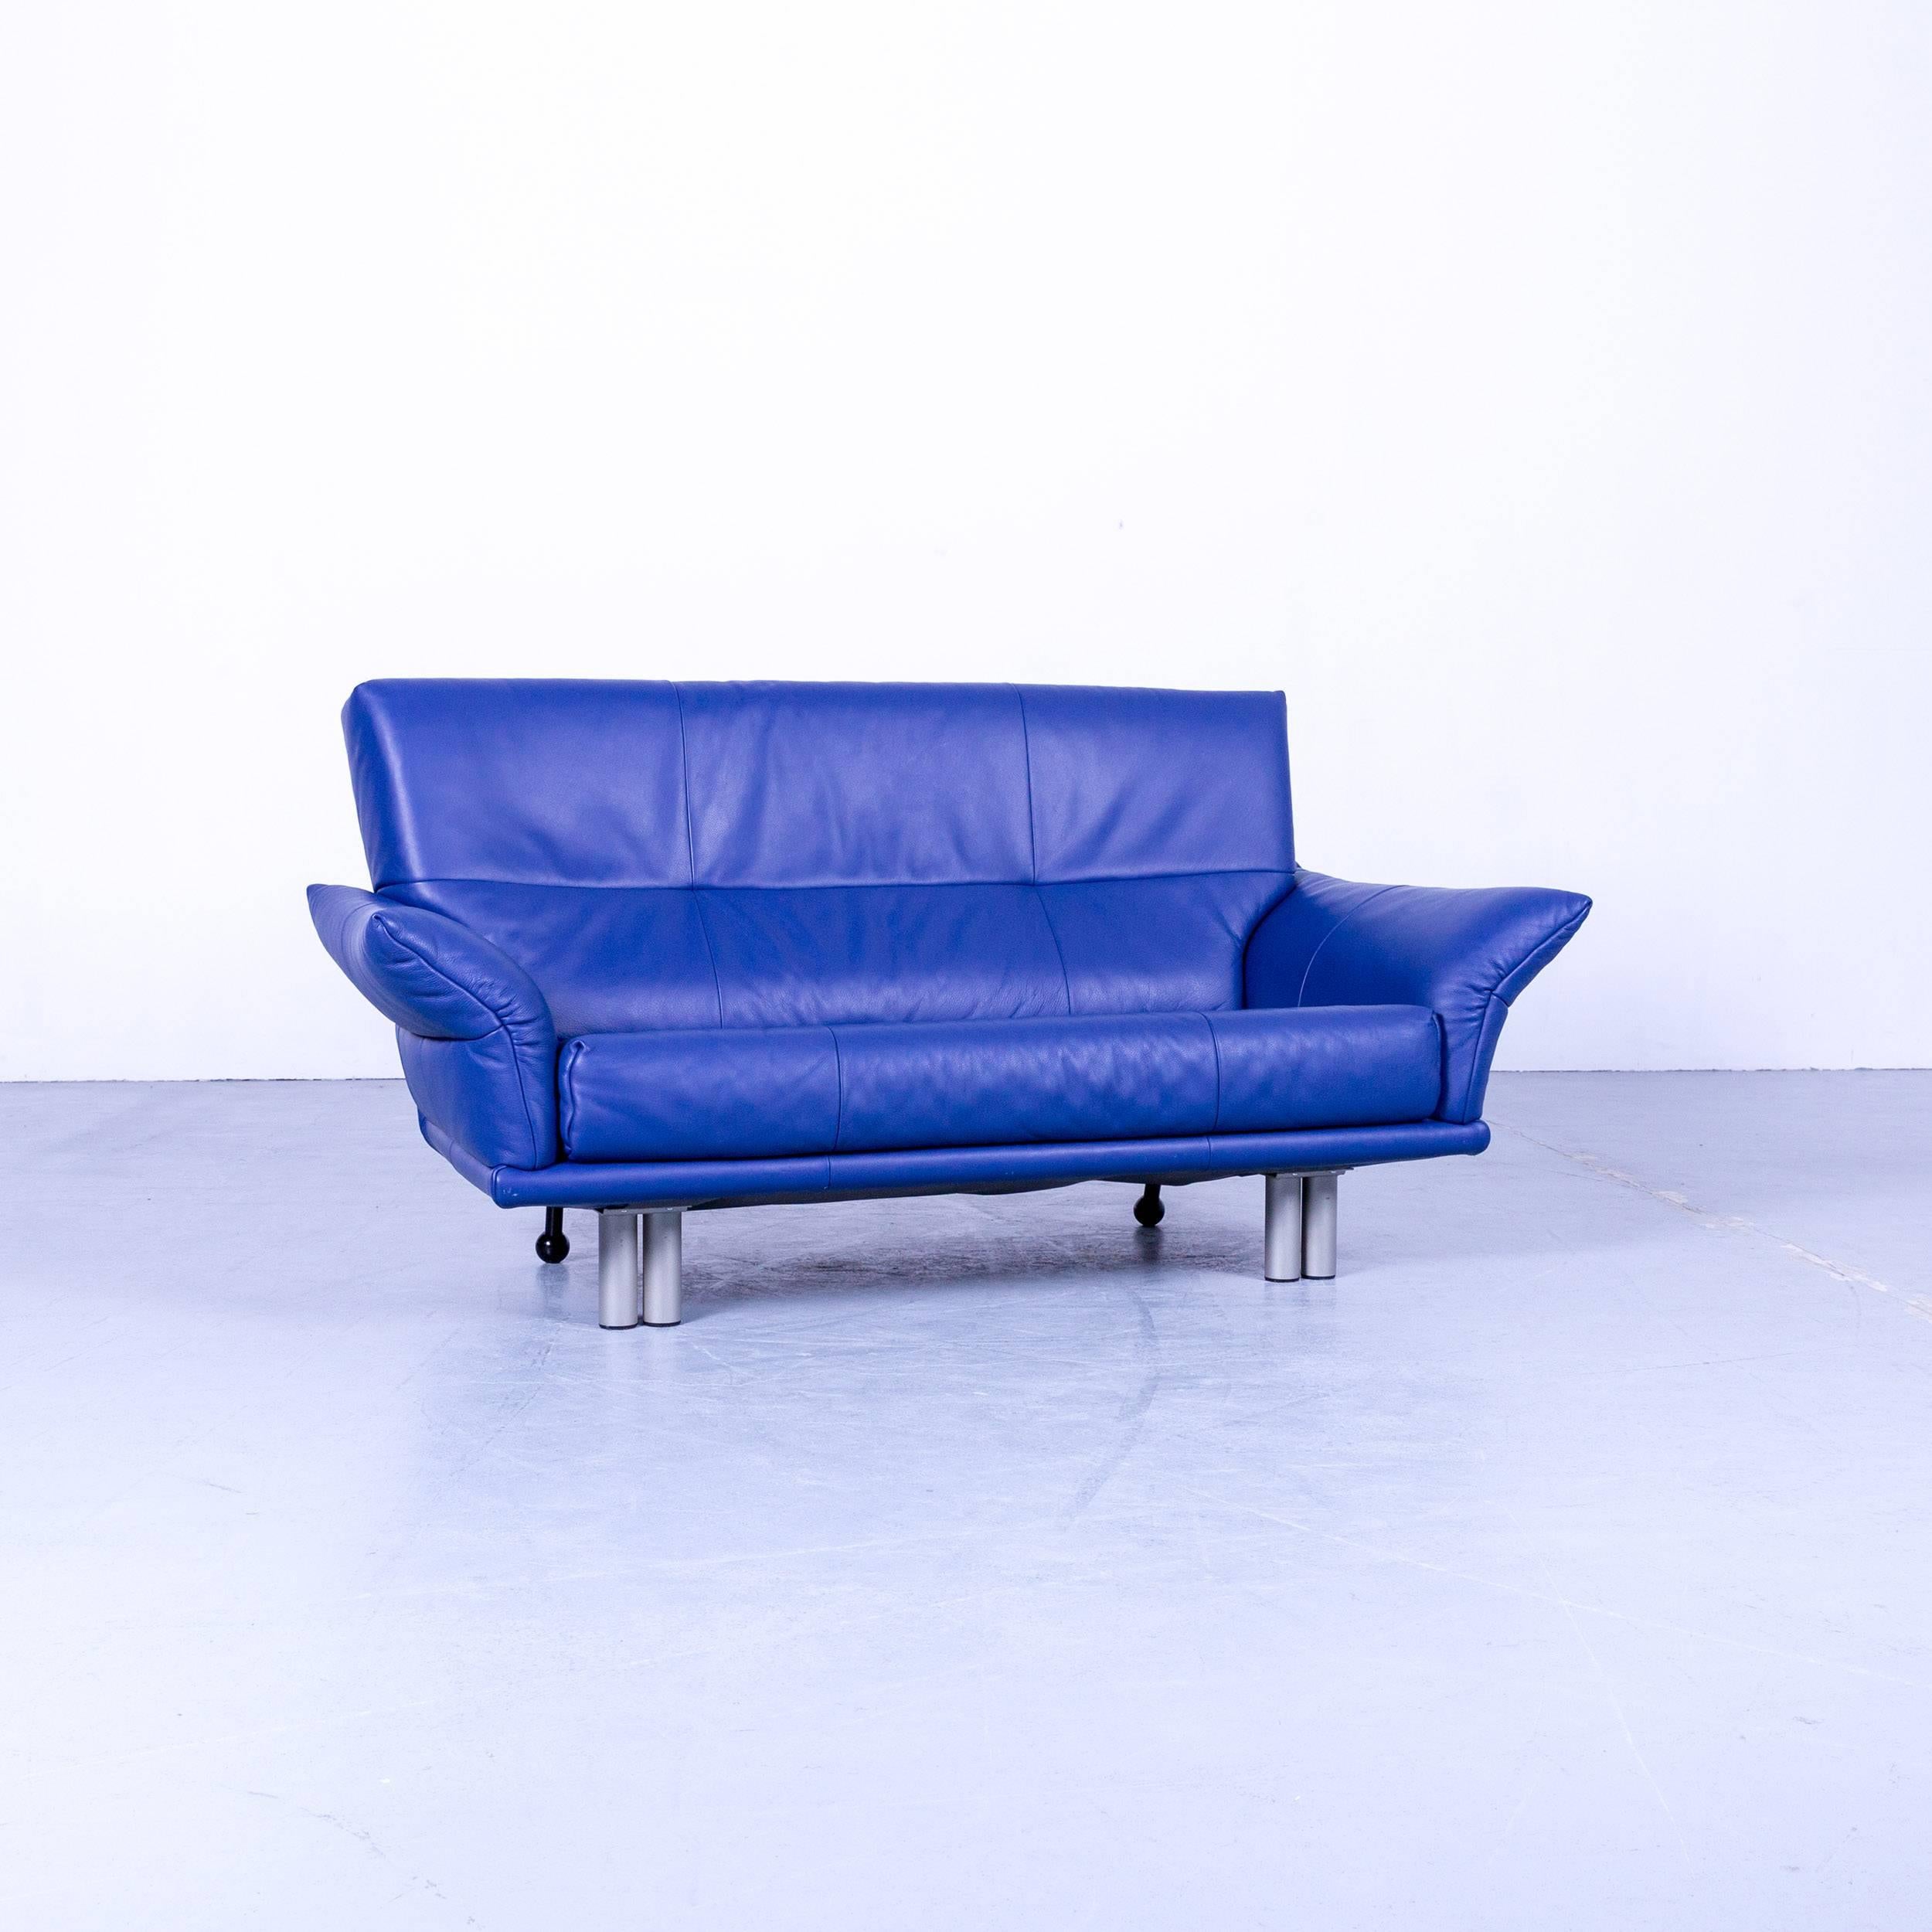 Rolf Benz bmp designer sofa leather blue two-seat couch modern in a minimalistic and modern design, made for pure comfort in Germany.